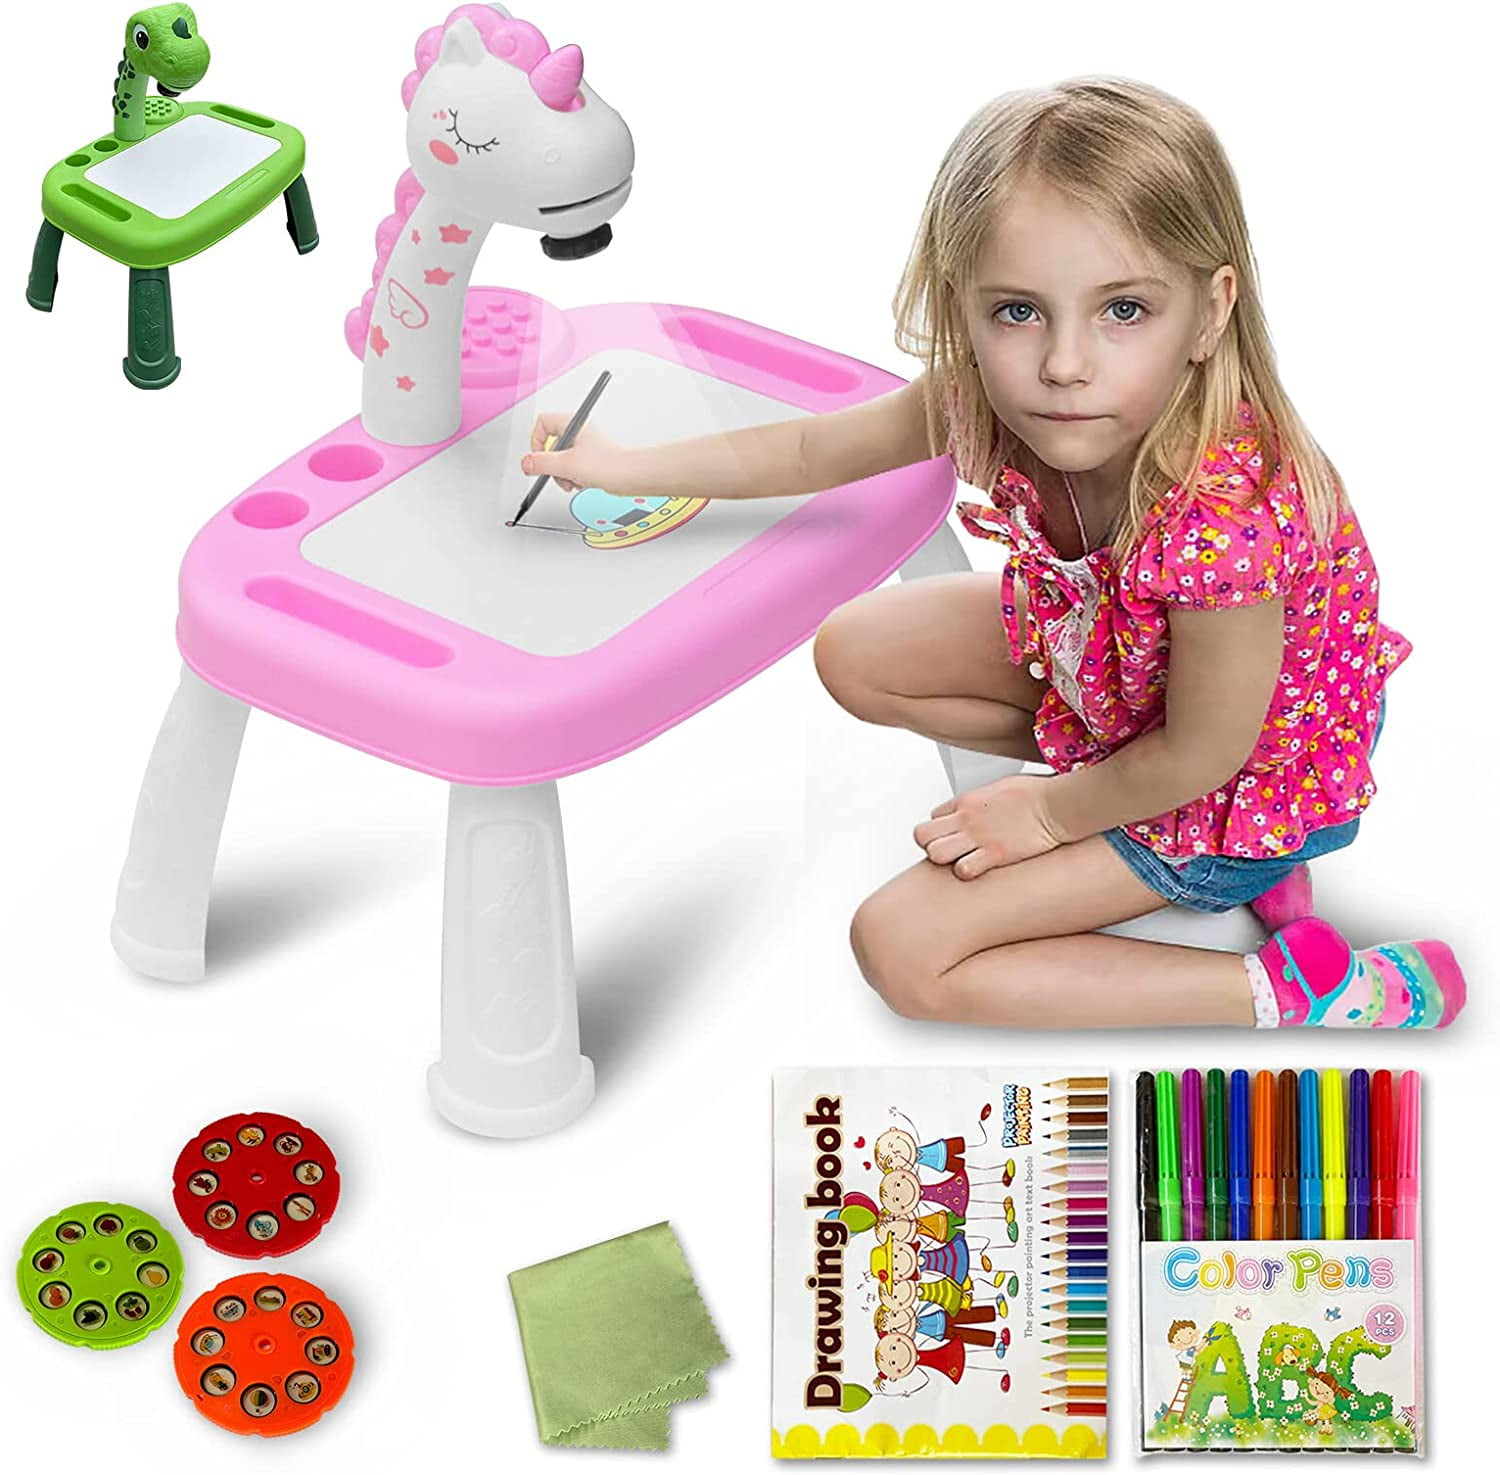 Unicorn Drawing Projector, Arts and Crafts for Girls, Contains Drawing  Board with Music, Watercolor Pens, Pencils, Crayons, Scrapbook, Sticker  Book